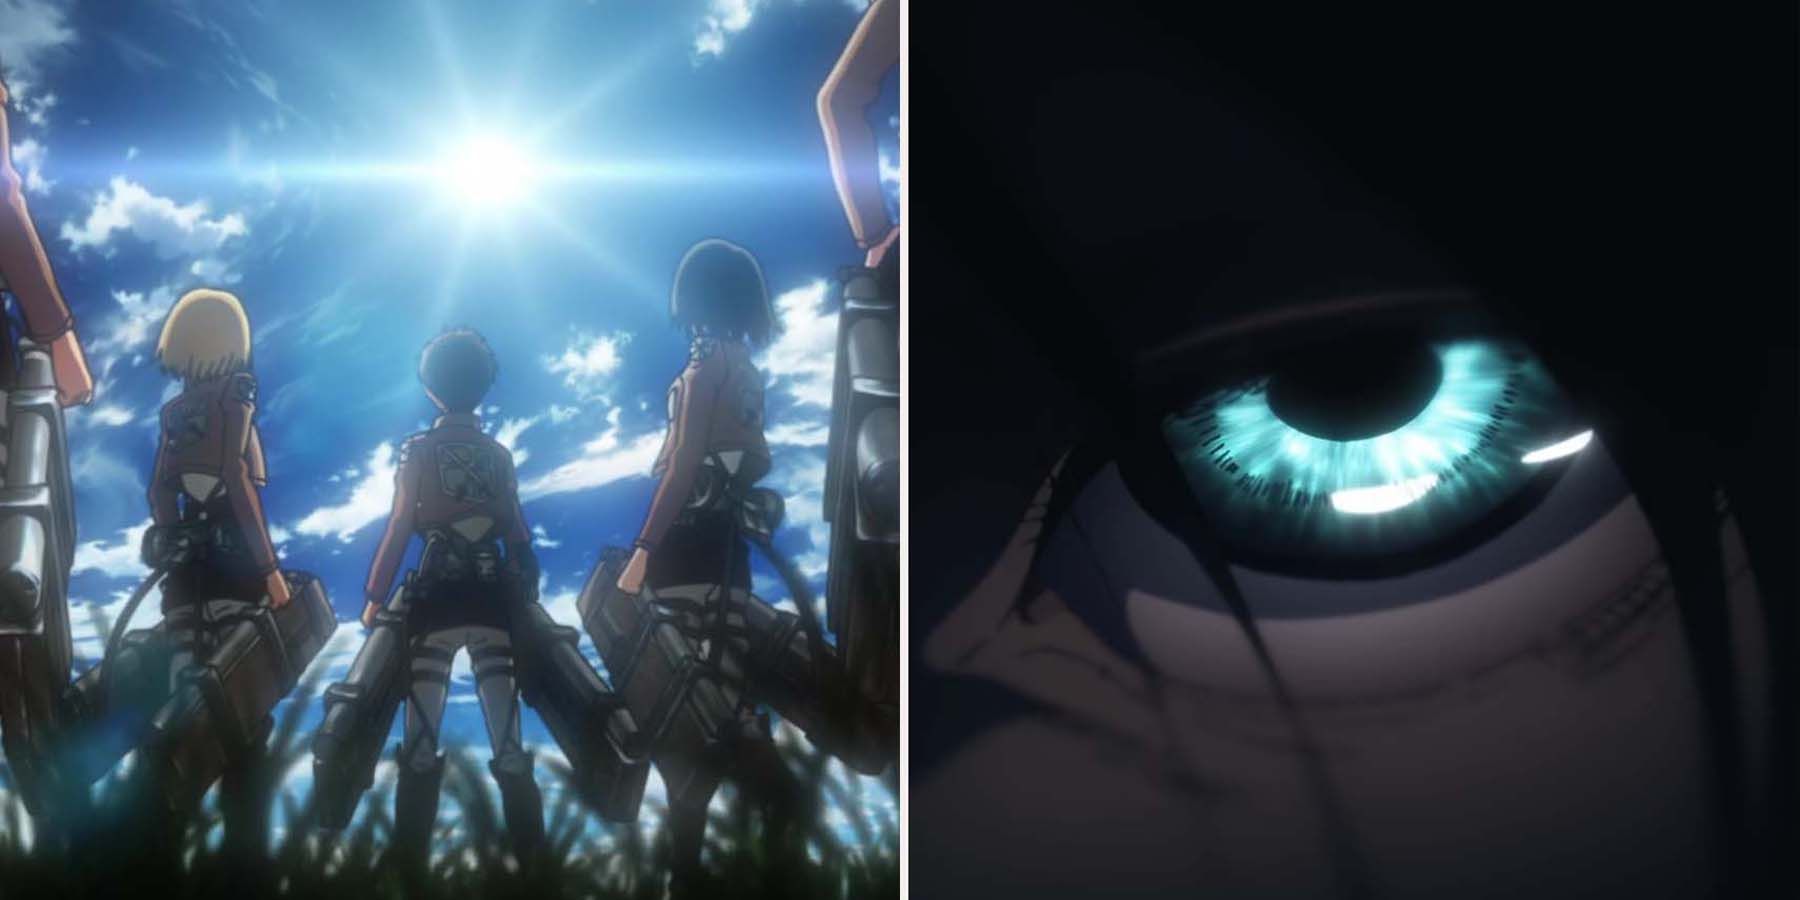 attack on titan openings all ranked featured image